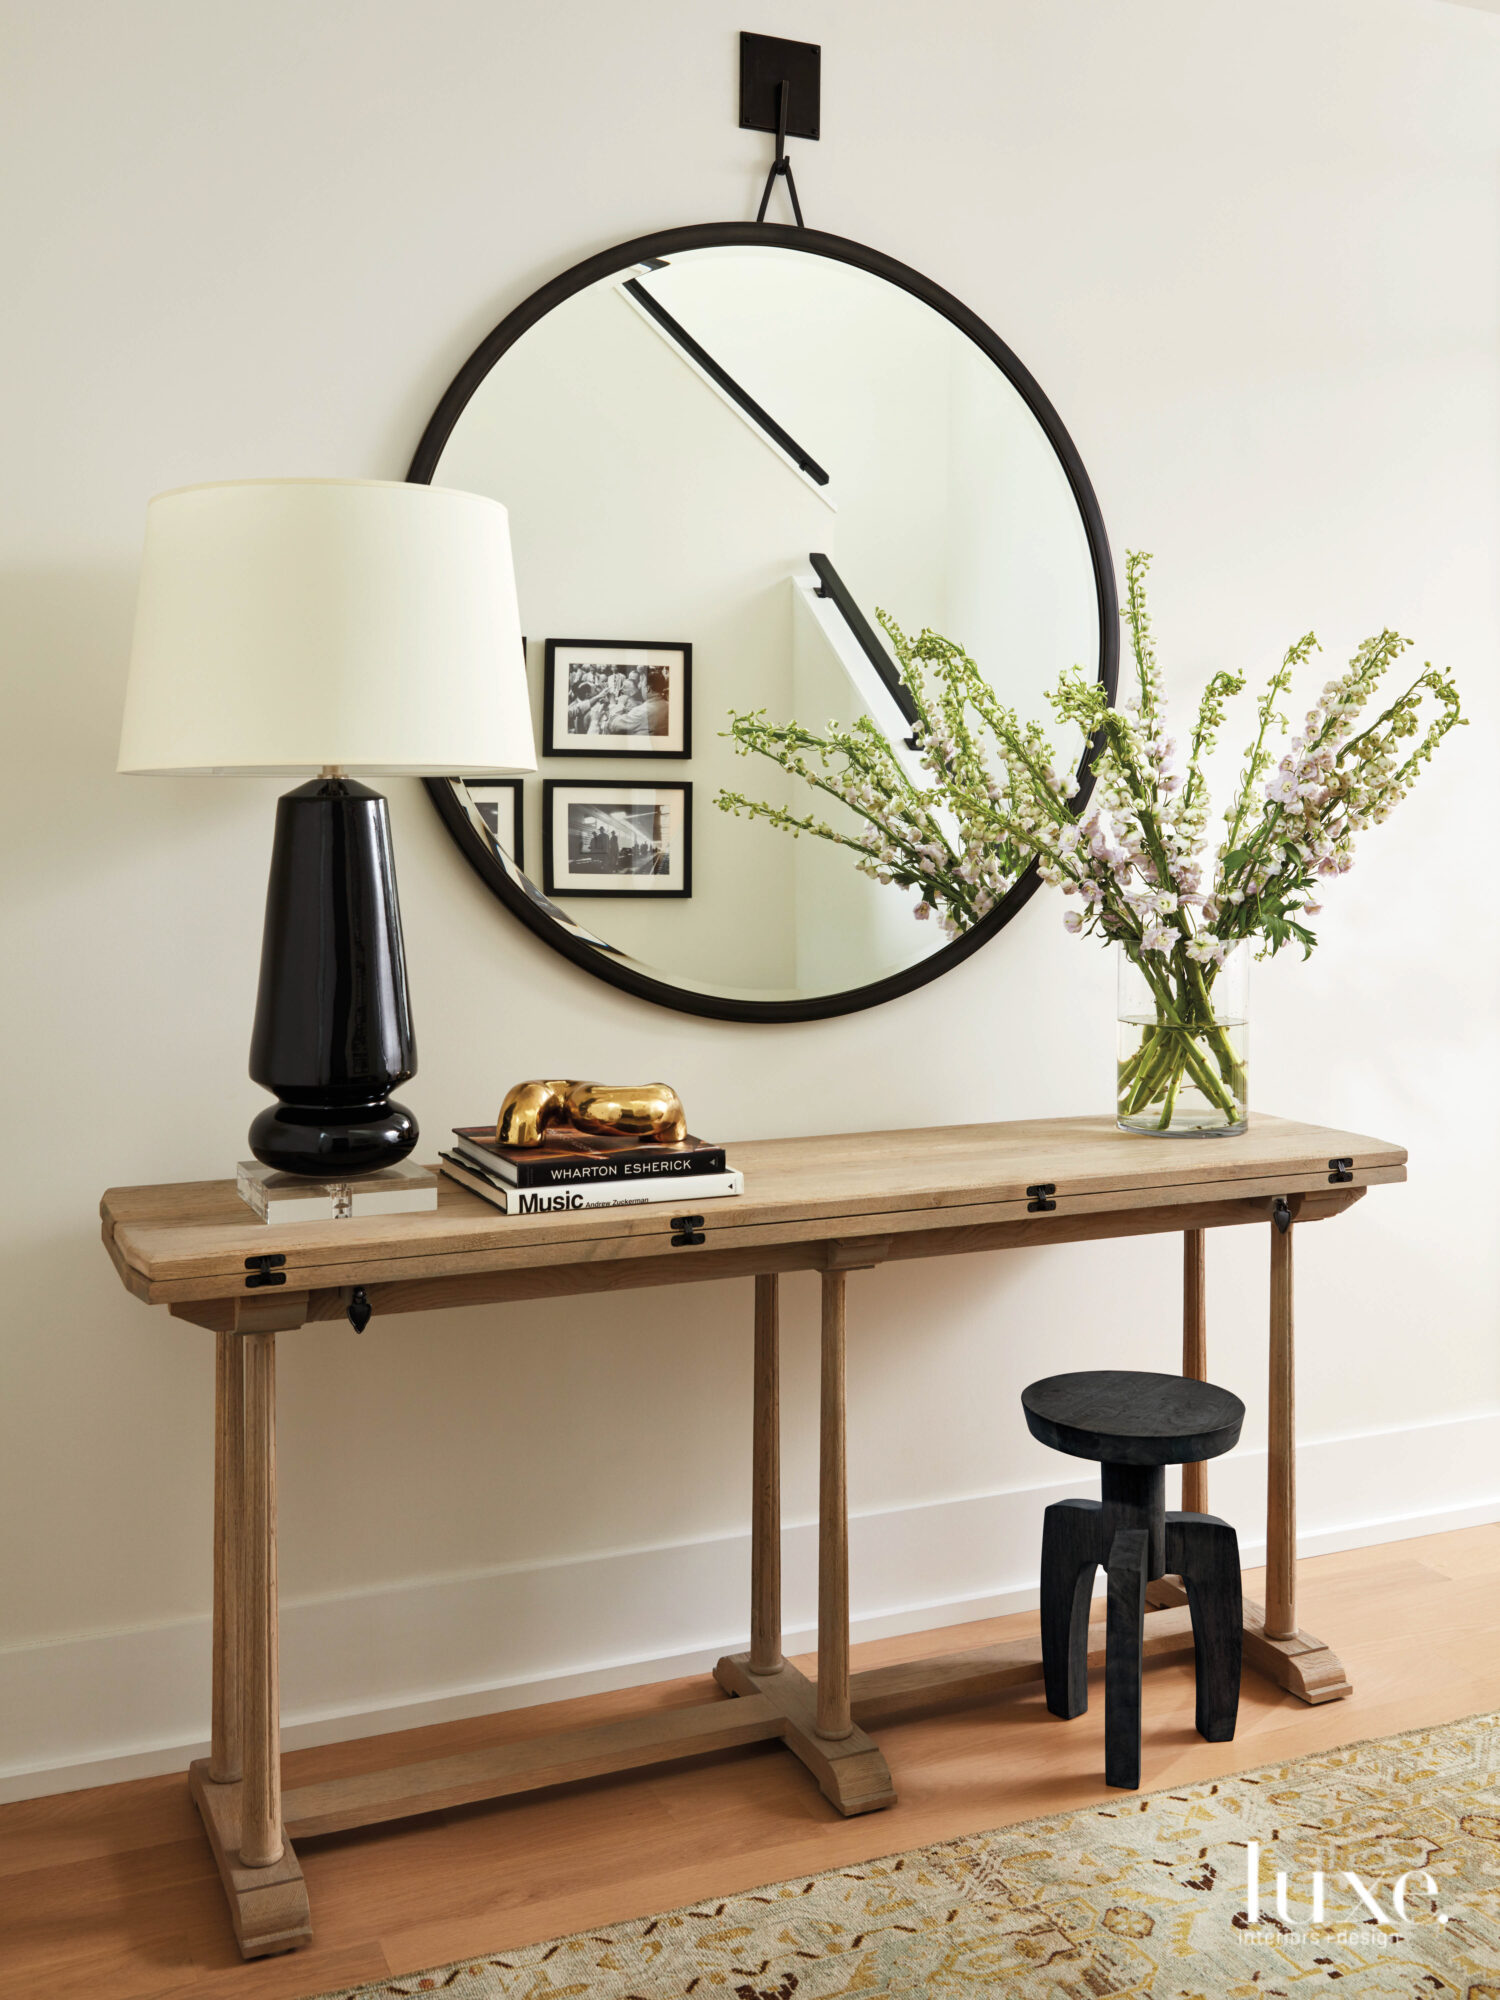 A wood console topped with a back lamp sits in the entry. A black-framed mirror hangs above it.